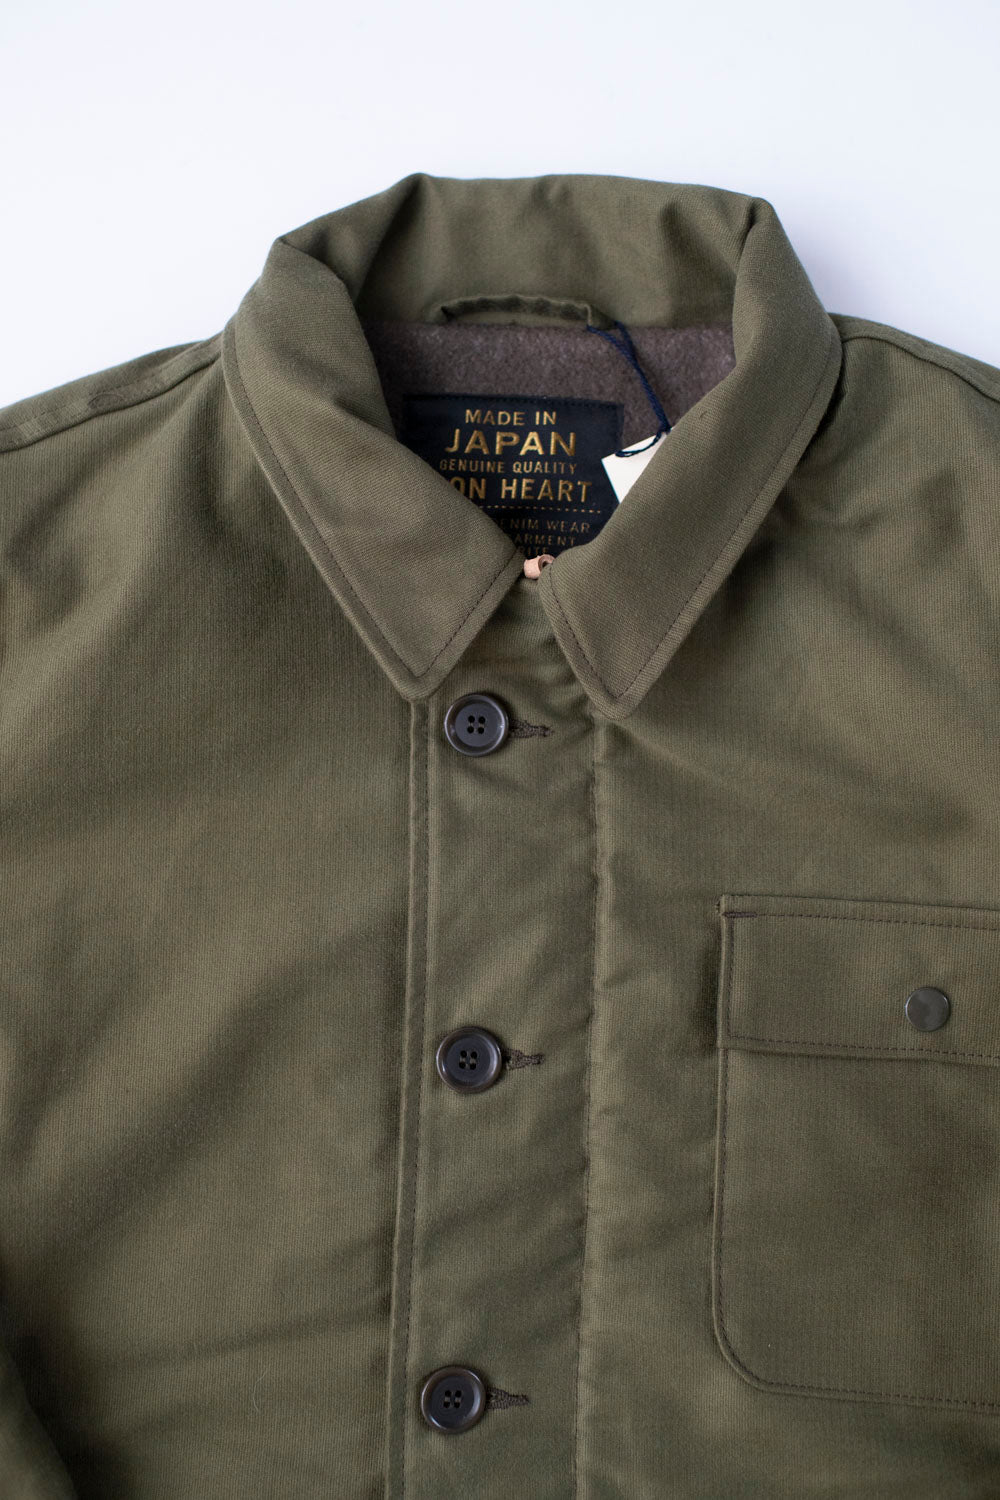 IHM-40-GRN - Whipcord A2 Deck Jacket - Olive Drab Green